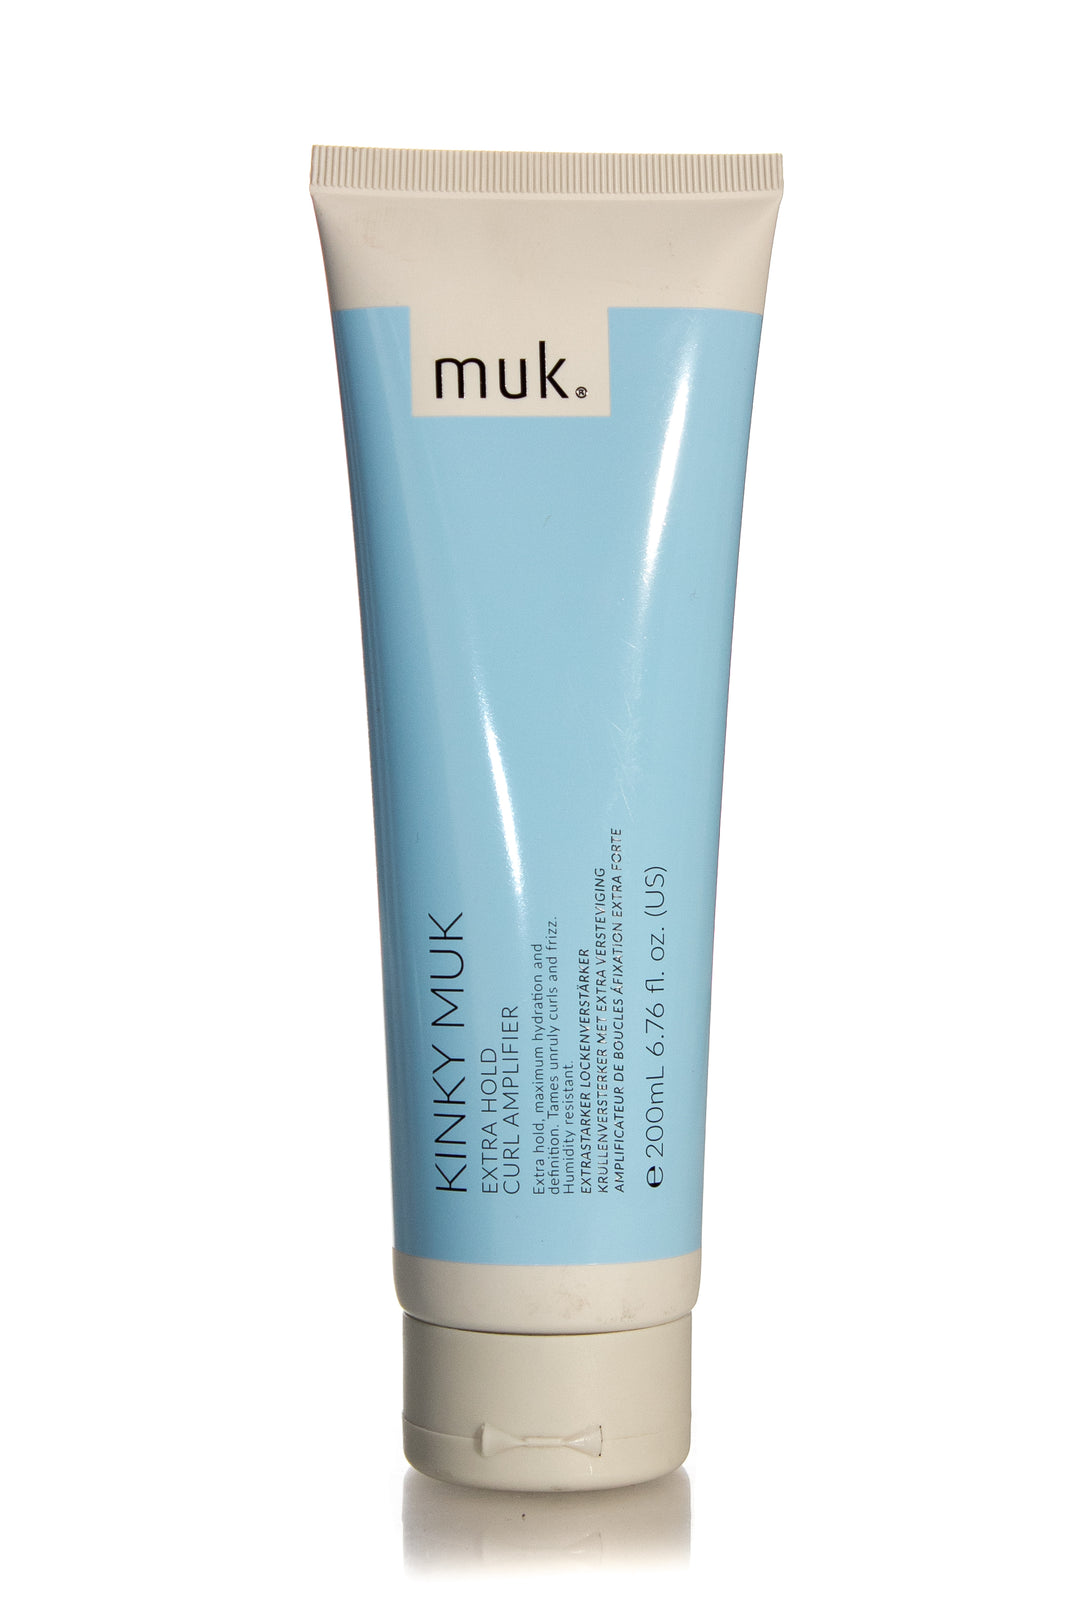 MUK KINKY MUK EXTRA HOLD CURL AMPLIFIER 200ML